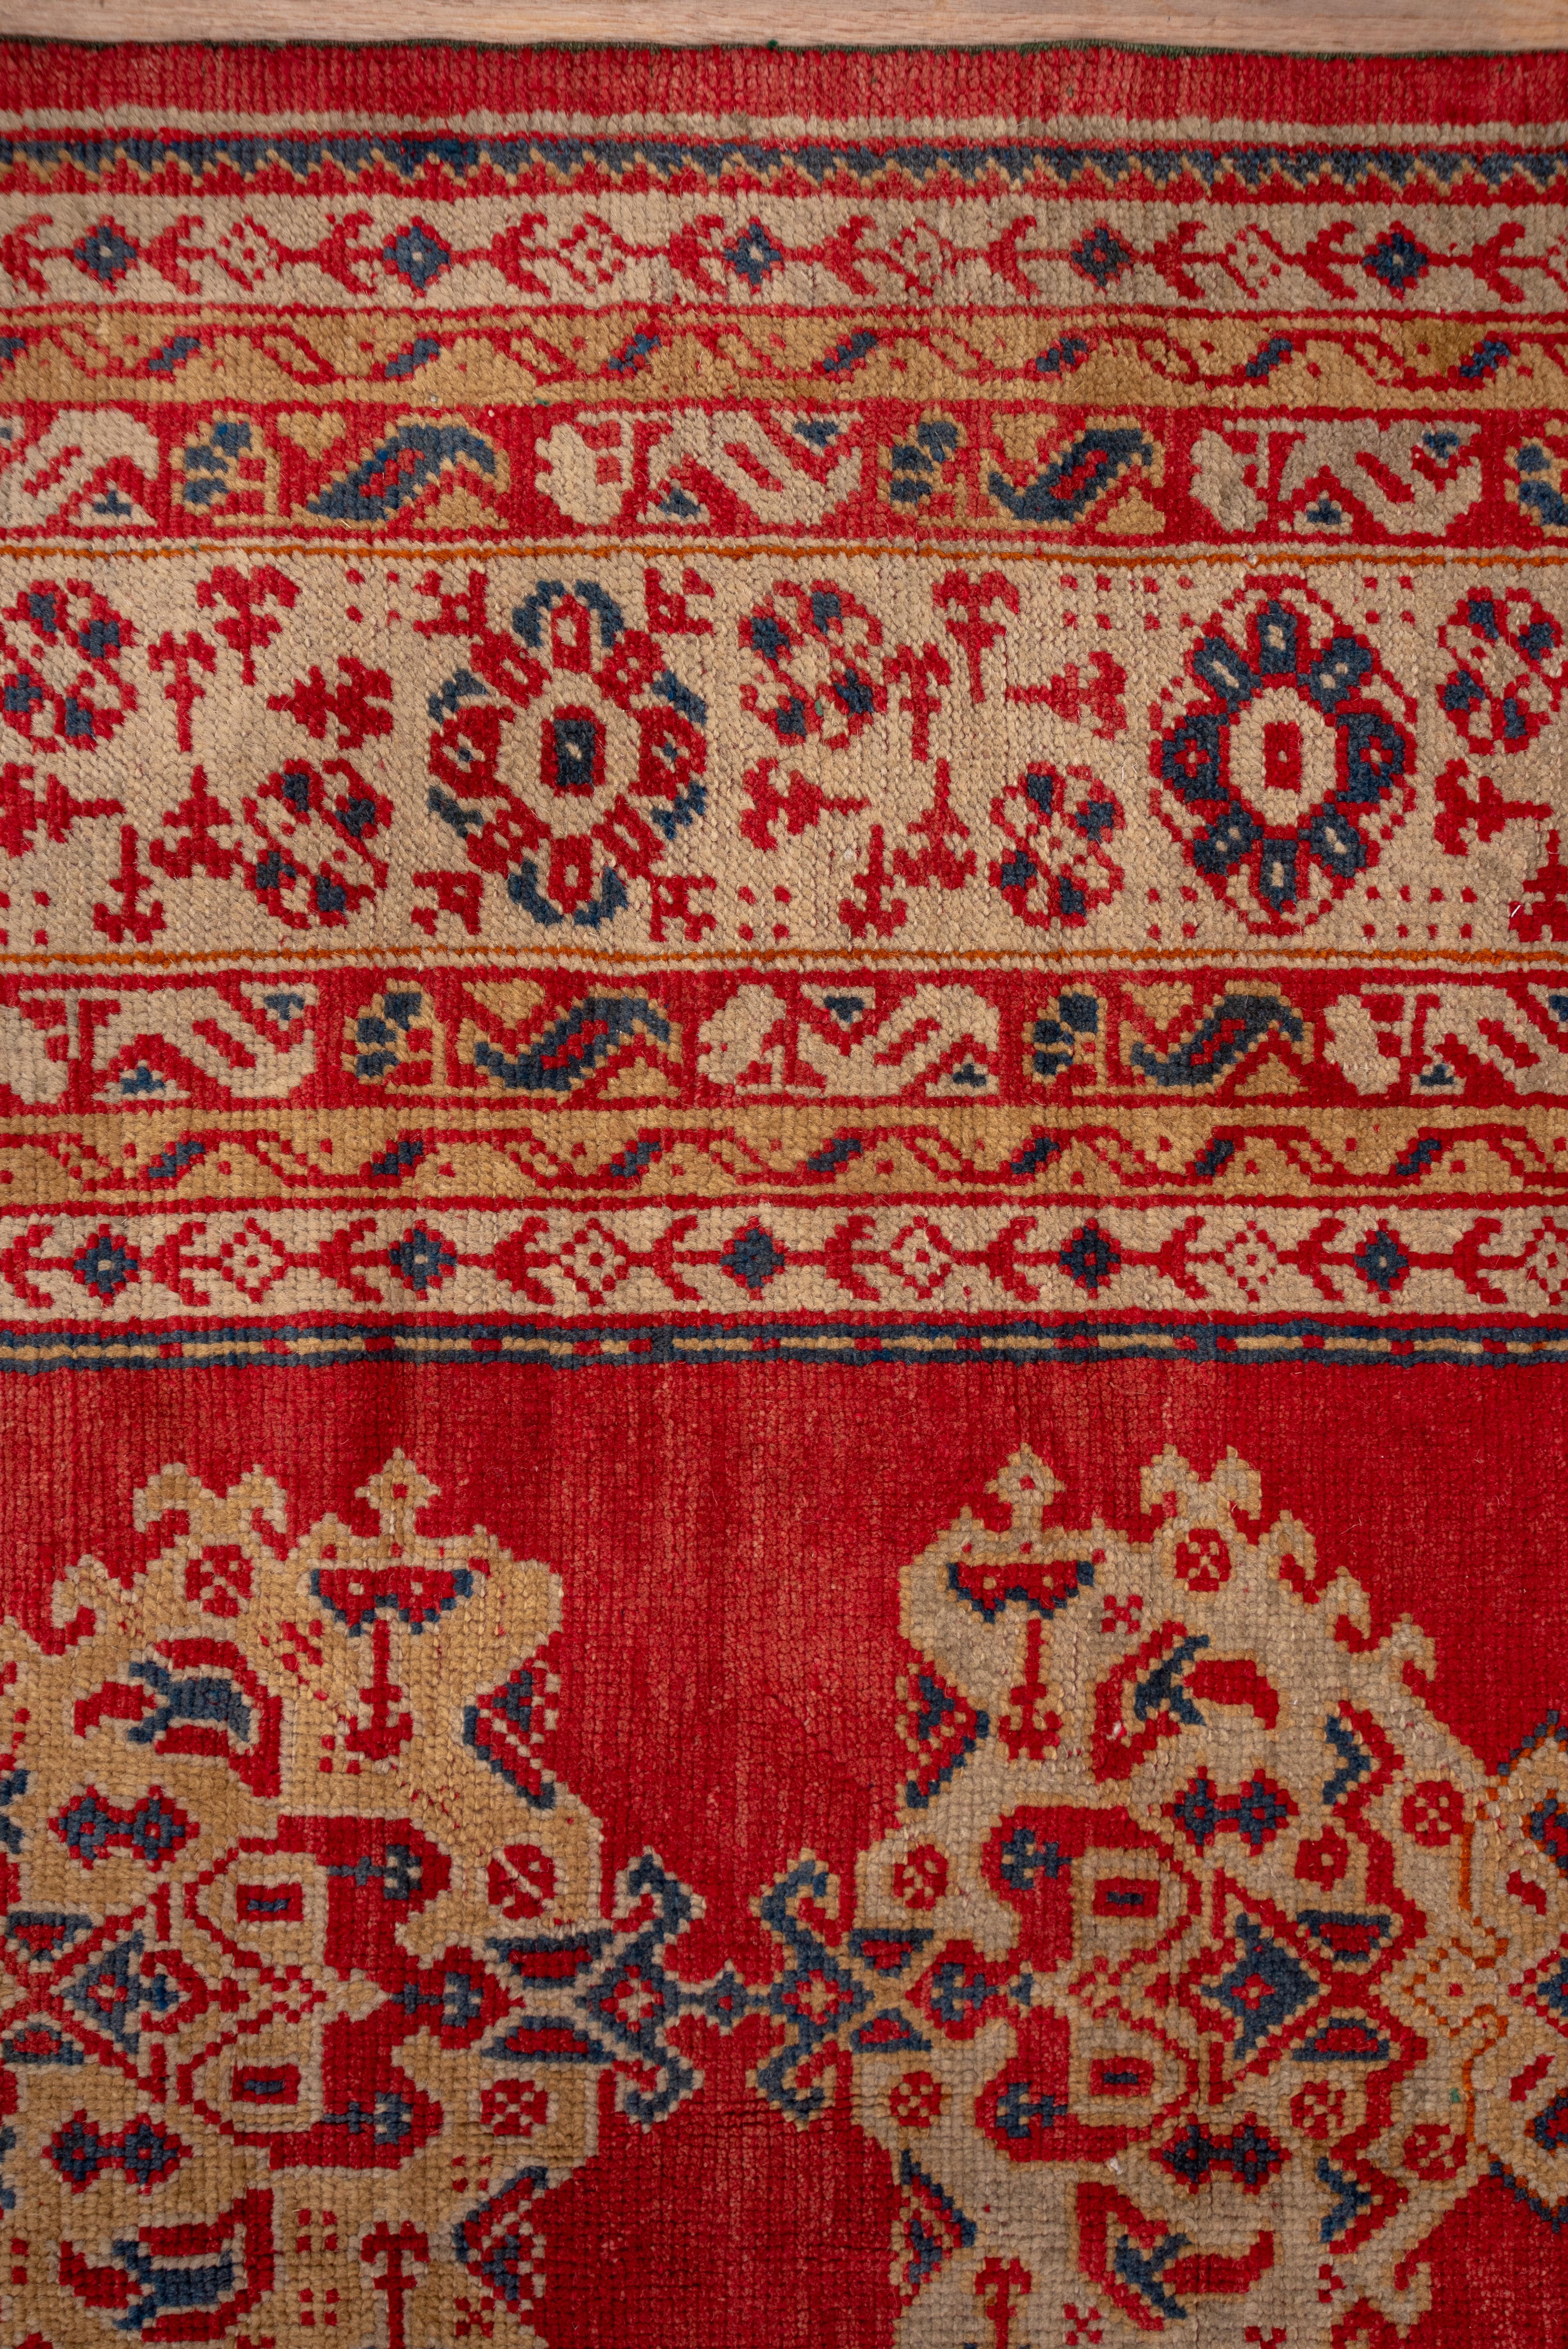 On a Turkey red field, are set five columns of hooked palmettes alternate with Yaprak (Leaf) verticals in a pattern derived from 18th century Smyrna Oushak carpets. The light green border displays octagon rosettes and bent hyacinth sprays. The